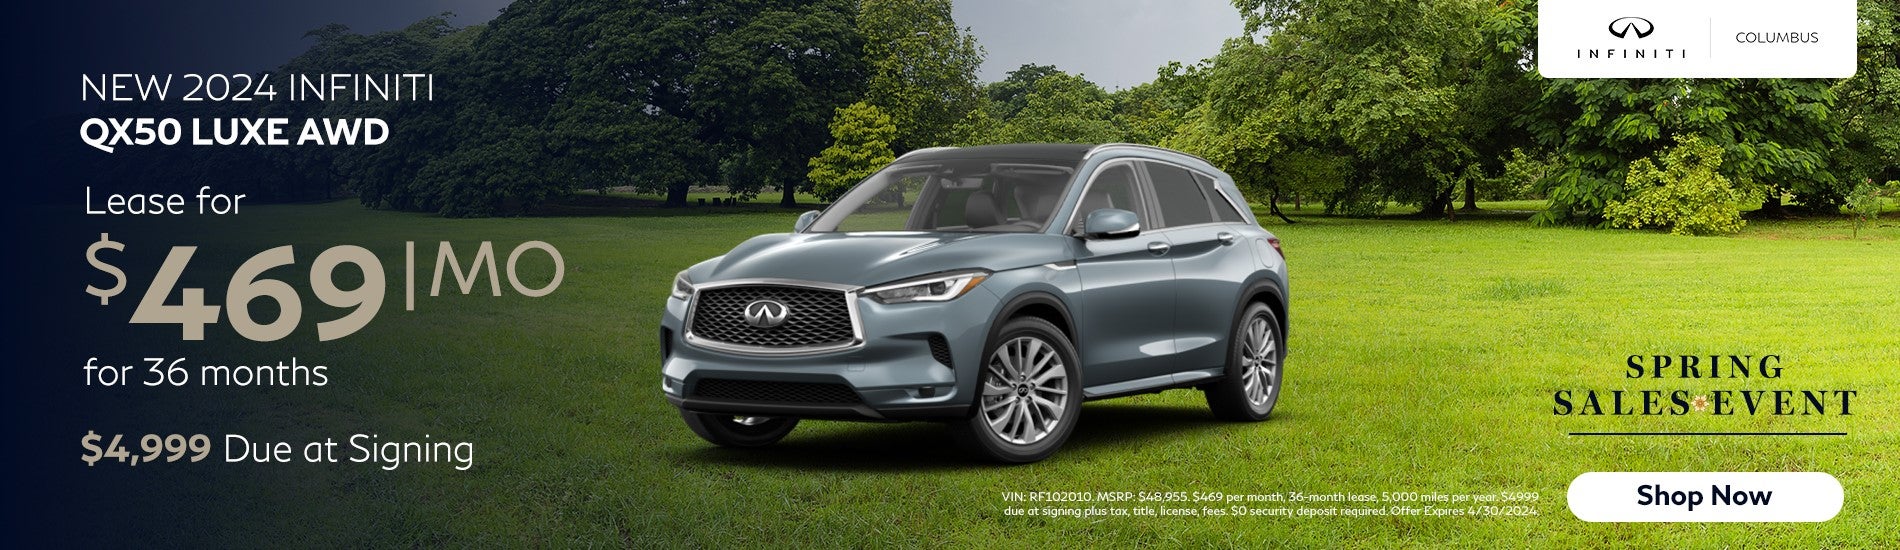 Lease Offer 2024 New QX50 Luxe AWD